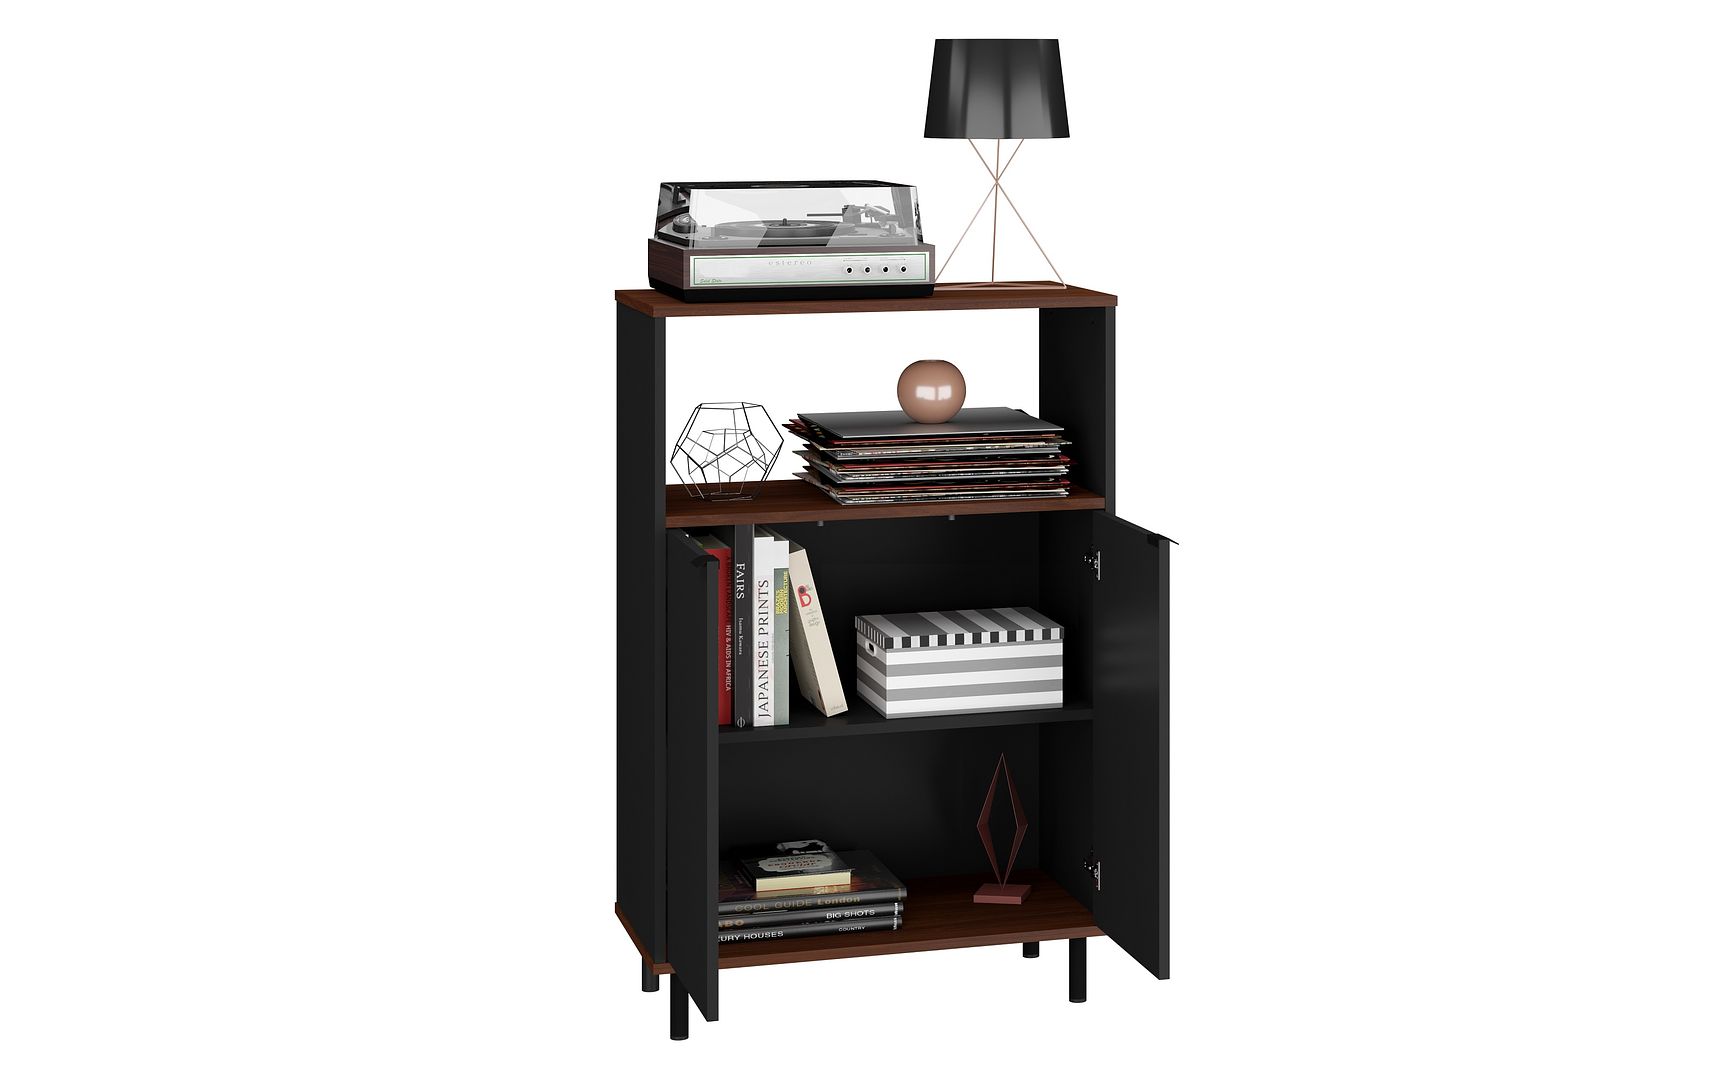 Manhattan Comfort Mosholu Accent Cabinet With 3 Shelves In Black & Nut Brown